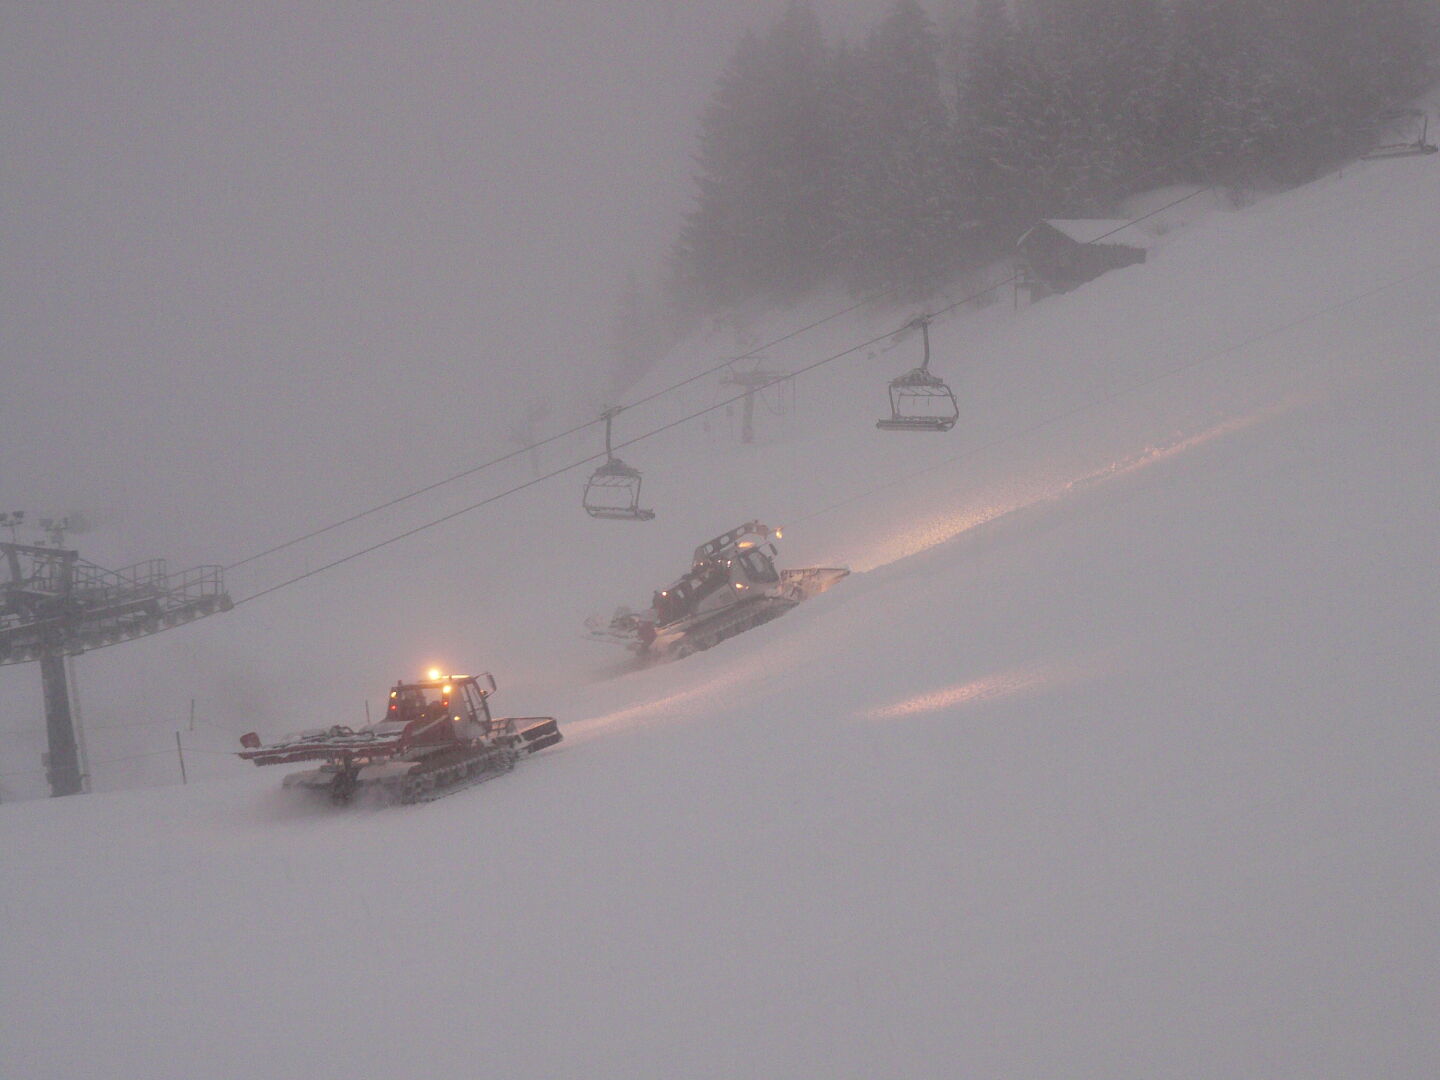 One last foggy look at the snowcats.